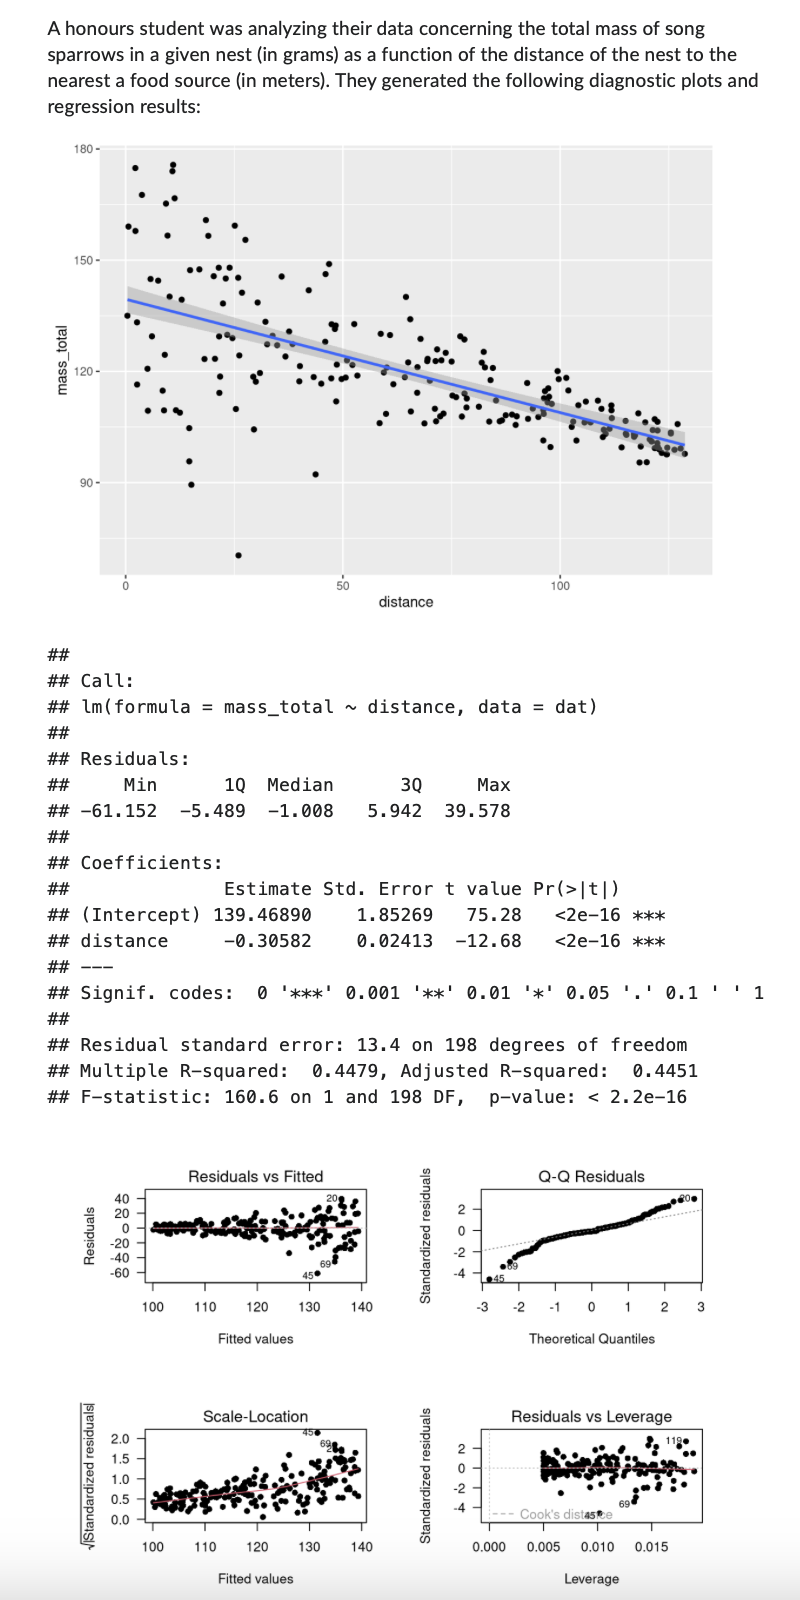 A honours student was analyzing their data concerning the total mass of song
sparrows in a given nest (in grams) as a function of the distance of the nest to the
nearest a food source (in meters). They generated the following diagnostic plots and
regression results:
mass_total
180-
150-
120-
90-
##
## Call:
## lm (formula = mass_total
Residuals
VIStandardized residuals
##
## Residuals:
##
Min
1Q Median
3Q
Max
## -61.152 -5.489 -1.008 5.942 39.578
##
## Coefficients:
##
## (Intercept)
## distance
## ---
## Signif. codes: 0 '***' 0.001
0 '***' 0.001 '**' 0.01 '*' 0.05 '.' 0.1'' 1
##
40
20
0
-20
-40
-60
2.0
1.5
1.0
0.5
0.0
## Residual standard error: 13.4 on 198 degrees of freedom
## Multiple R-squared: 0.4479, Adjusted R-squared: 0.4451
## F-statistic: 160.6 on 1 and 198 DF, p-value: < 2.2e-16
100
TTTT
Residuals vs Fitted
Estimate Std. Error t value Pr(>|t|)
139.46890
-0.30582
Fitted values
100 110
Scale-Location
50
450
110 120 130 140
120
Fitted values.
distance
distance, data = dat)
45€
1.85269 75.28
<2e-16 ***
0.02413 -12.68 <2e-16 ***
130 140
Standardized residuals
Standardized residuals
100
NON
-2
-4
NONT
45
Q-Q Residuals
T T
-3 -2 -1 0 1 2 3
Theoretical Quantiles
Residuals vs Leverage
Cook's distaste
0.000 0.005
69
119
0.010 0.015
Leverage
..